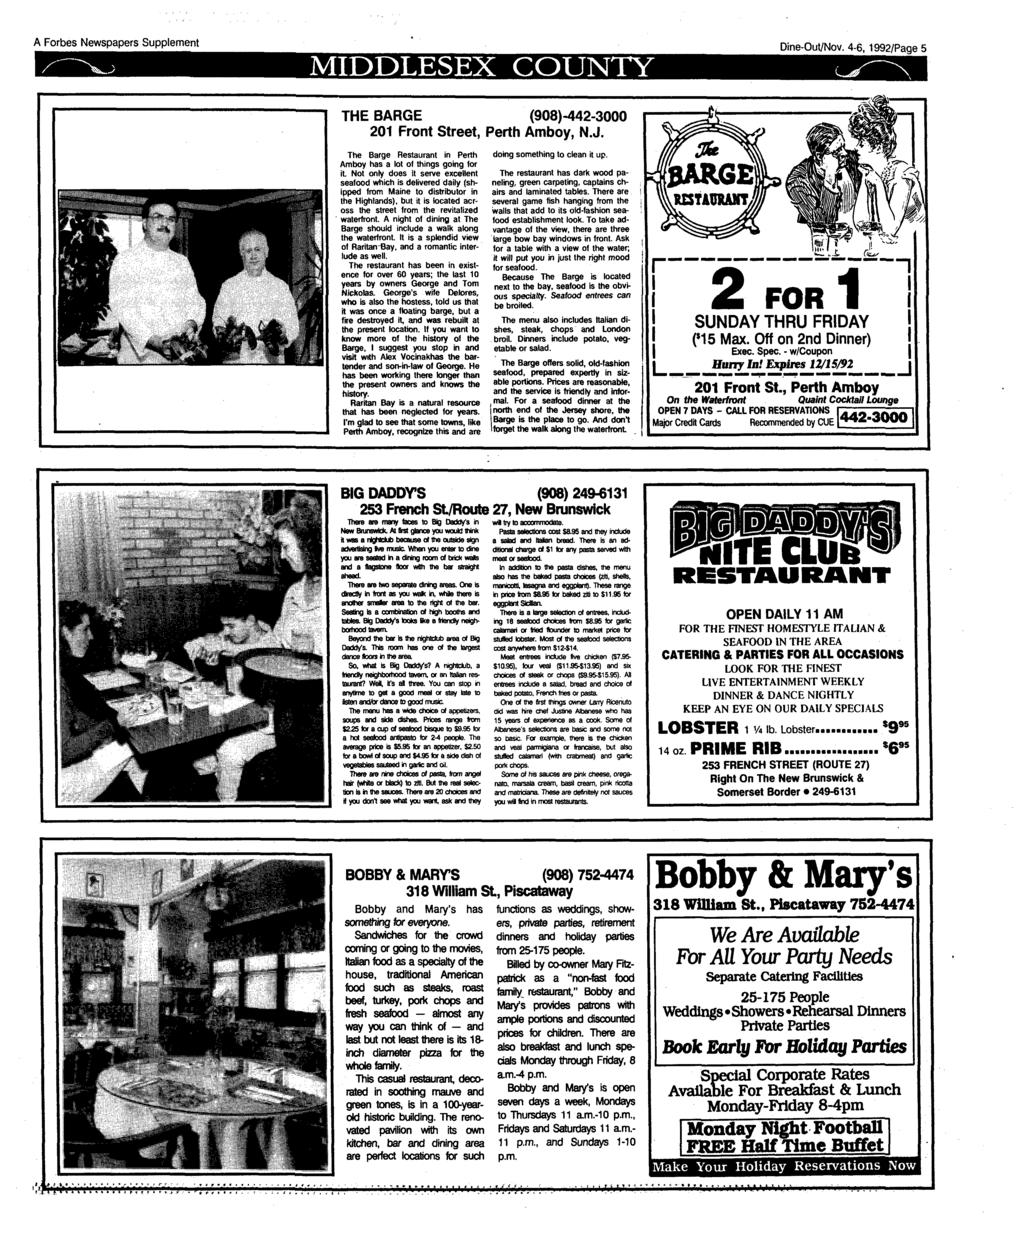 A Forbes Newspapers Supplement MIDDLESEX COUNTY Dine-Out/Nov. 4-6,1992/Page 5 THE BARGE (908)-442-3000 201 Front Street, Perth Amboy, N.J.